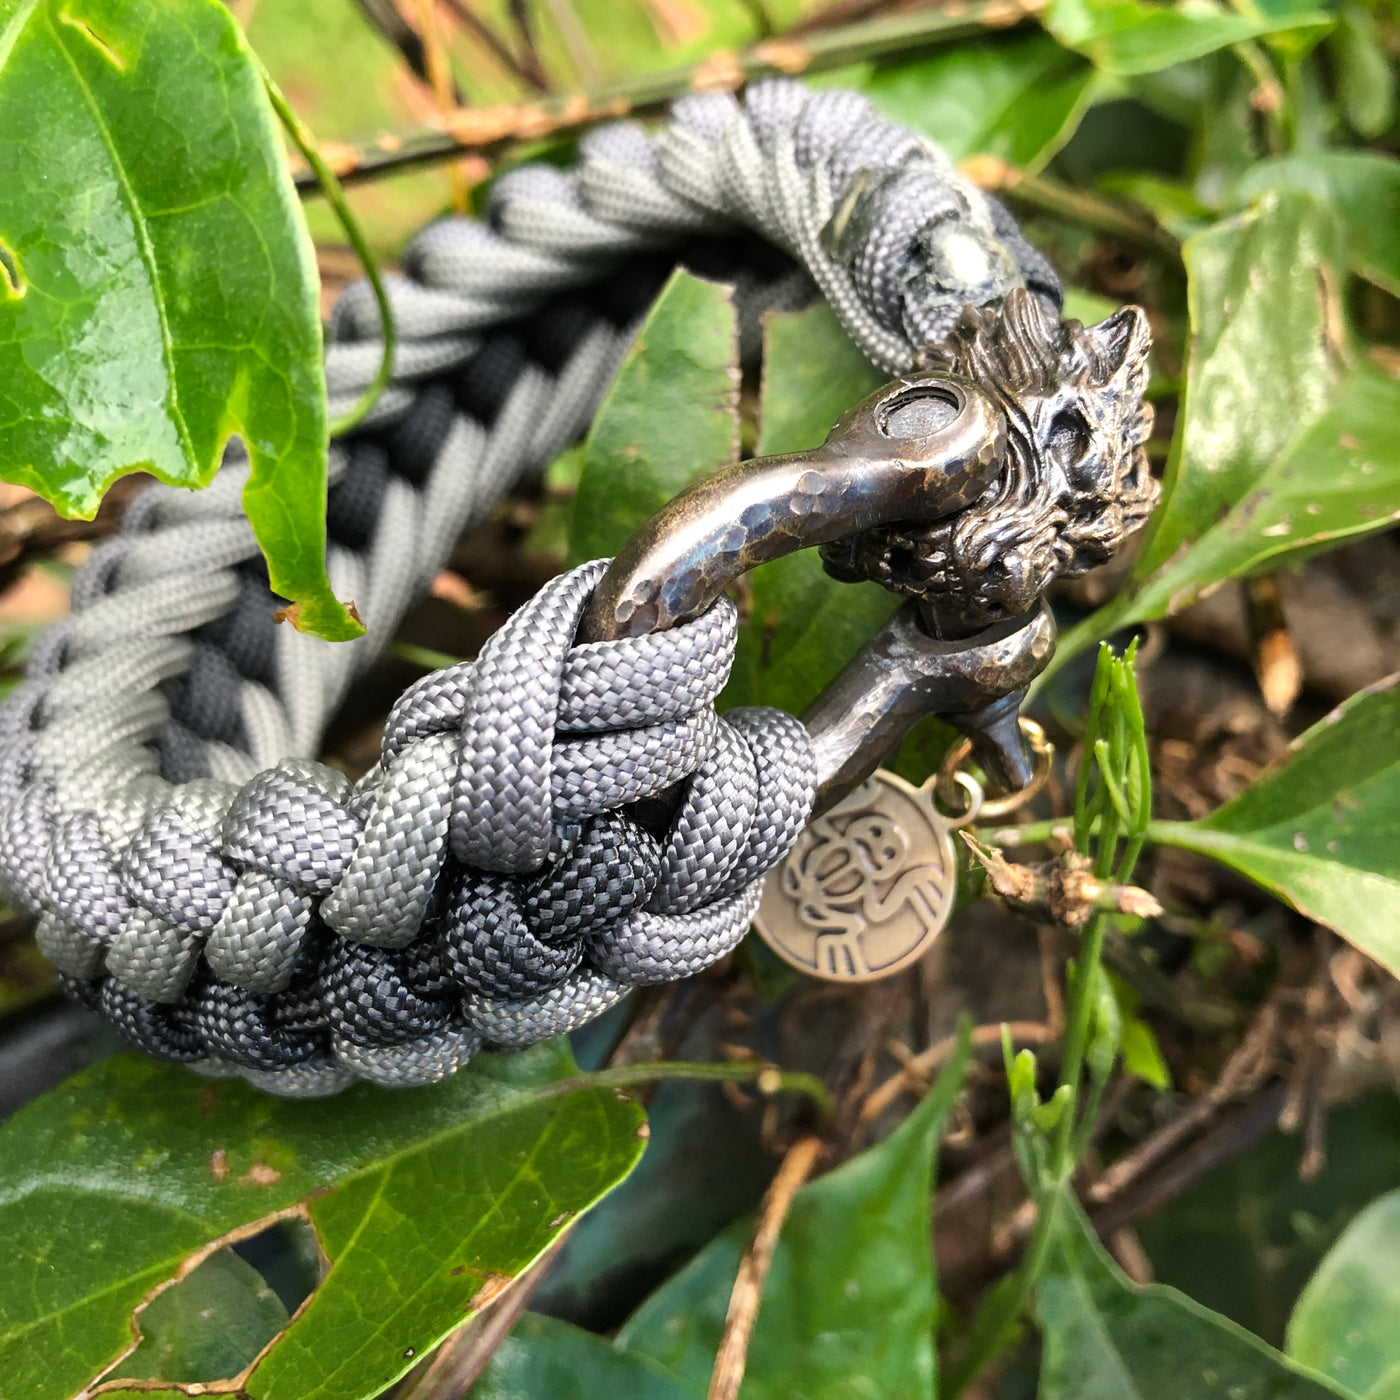 The Snarling Wolf paracord bracelet